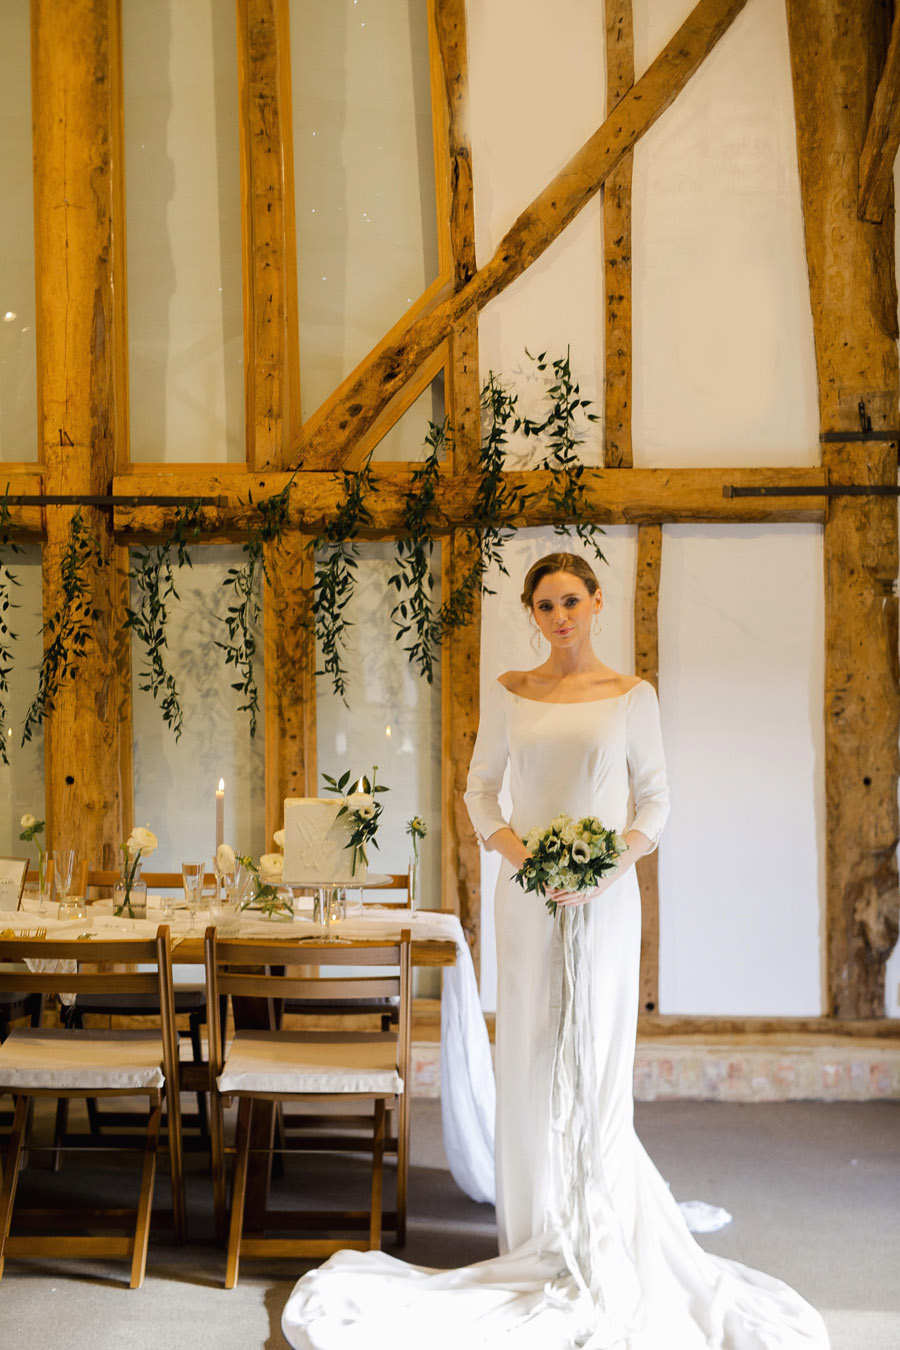 Sustainable, vegan and organic wedding styling ideas from the UK (16)